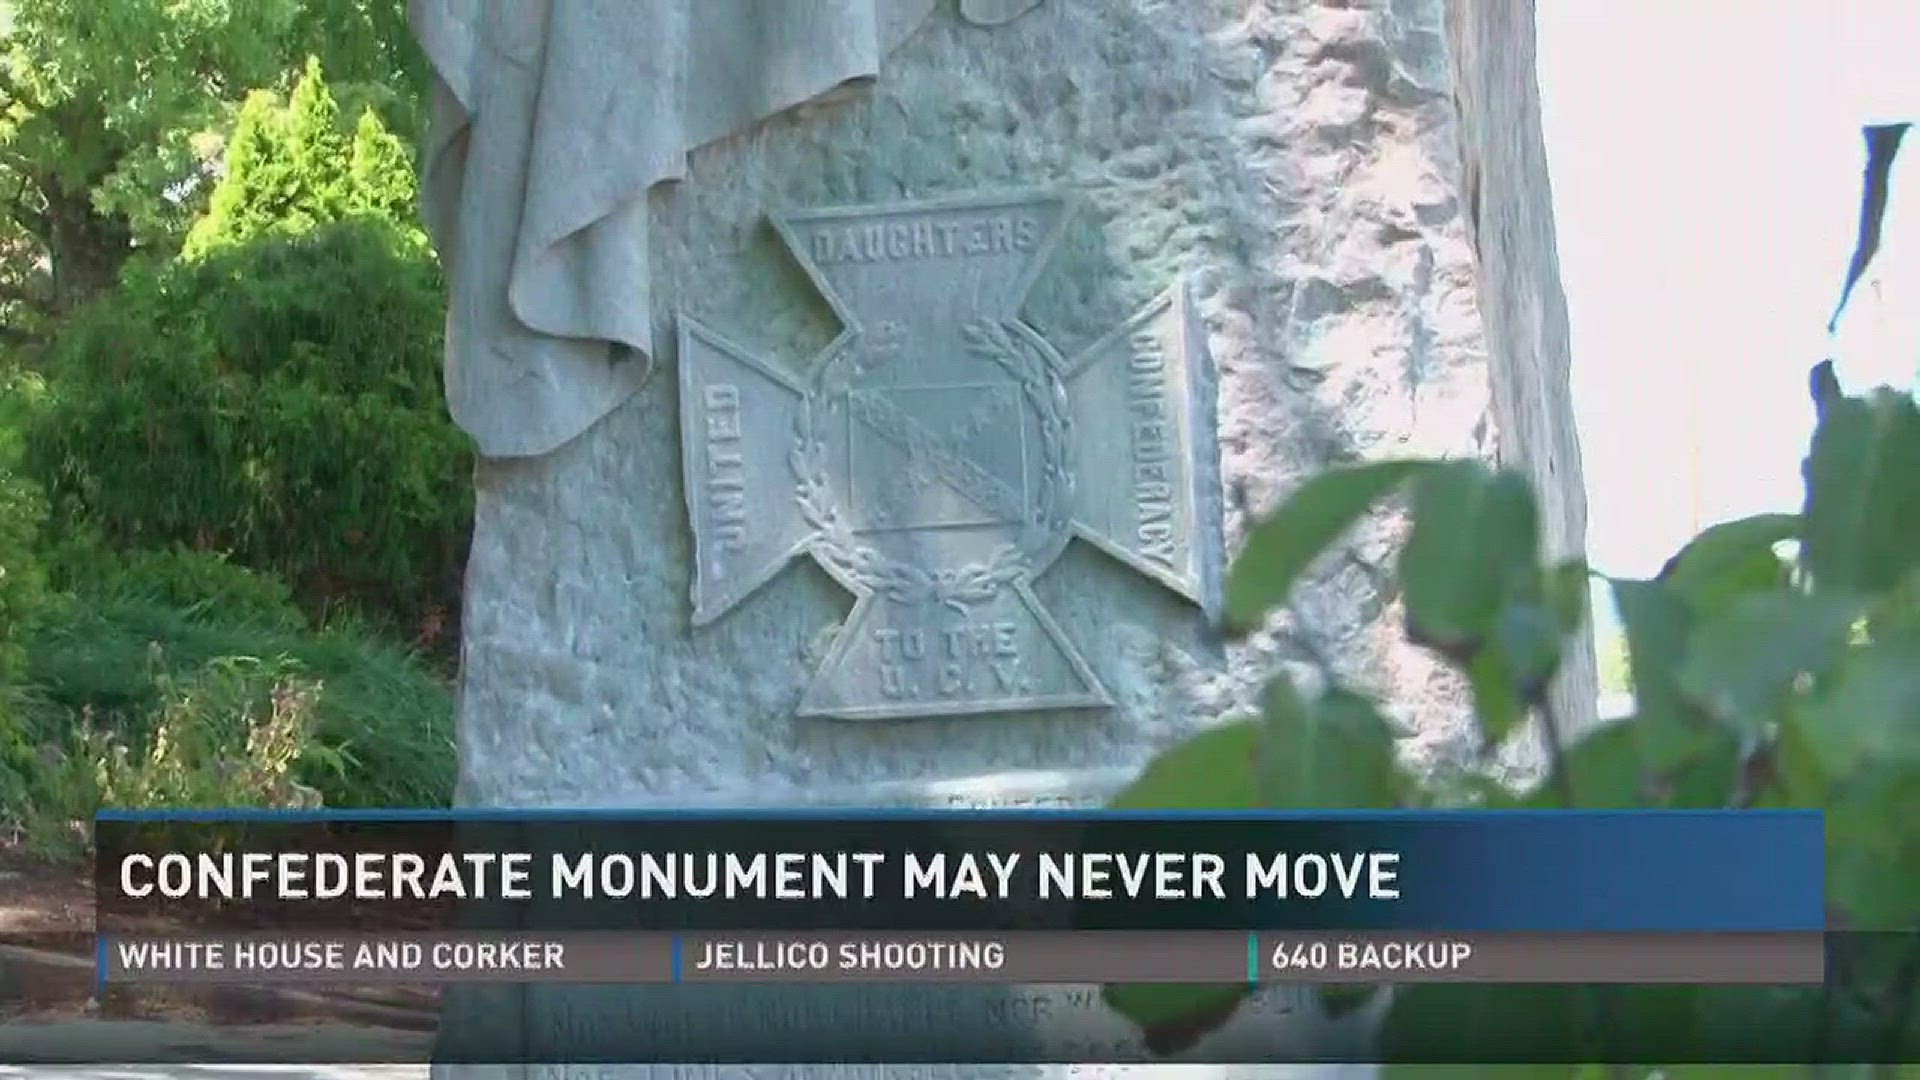 Aug. 24, 2017: A member of the Tennessee Historical Commission explains the process of removing a historical monument.